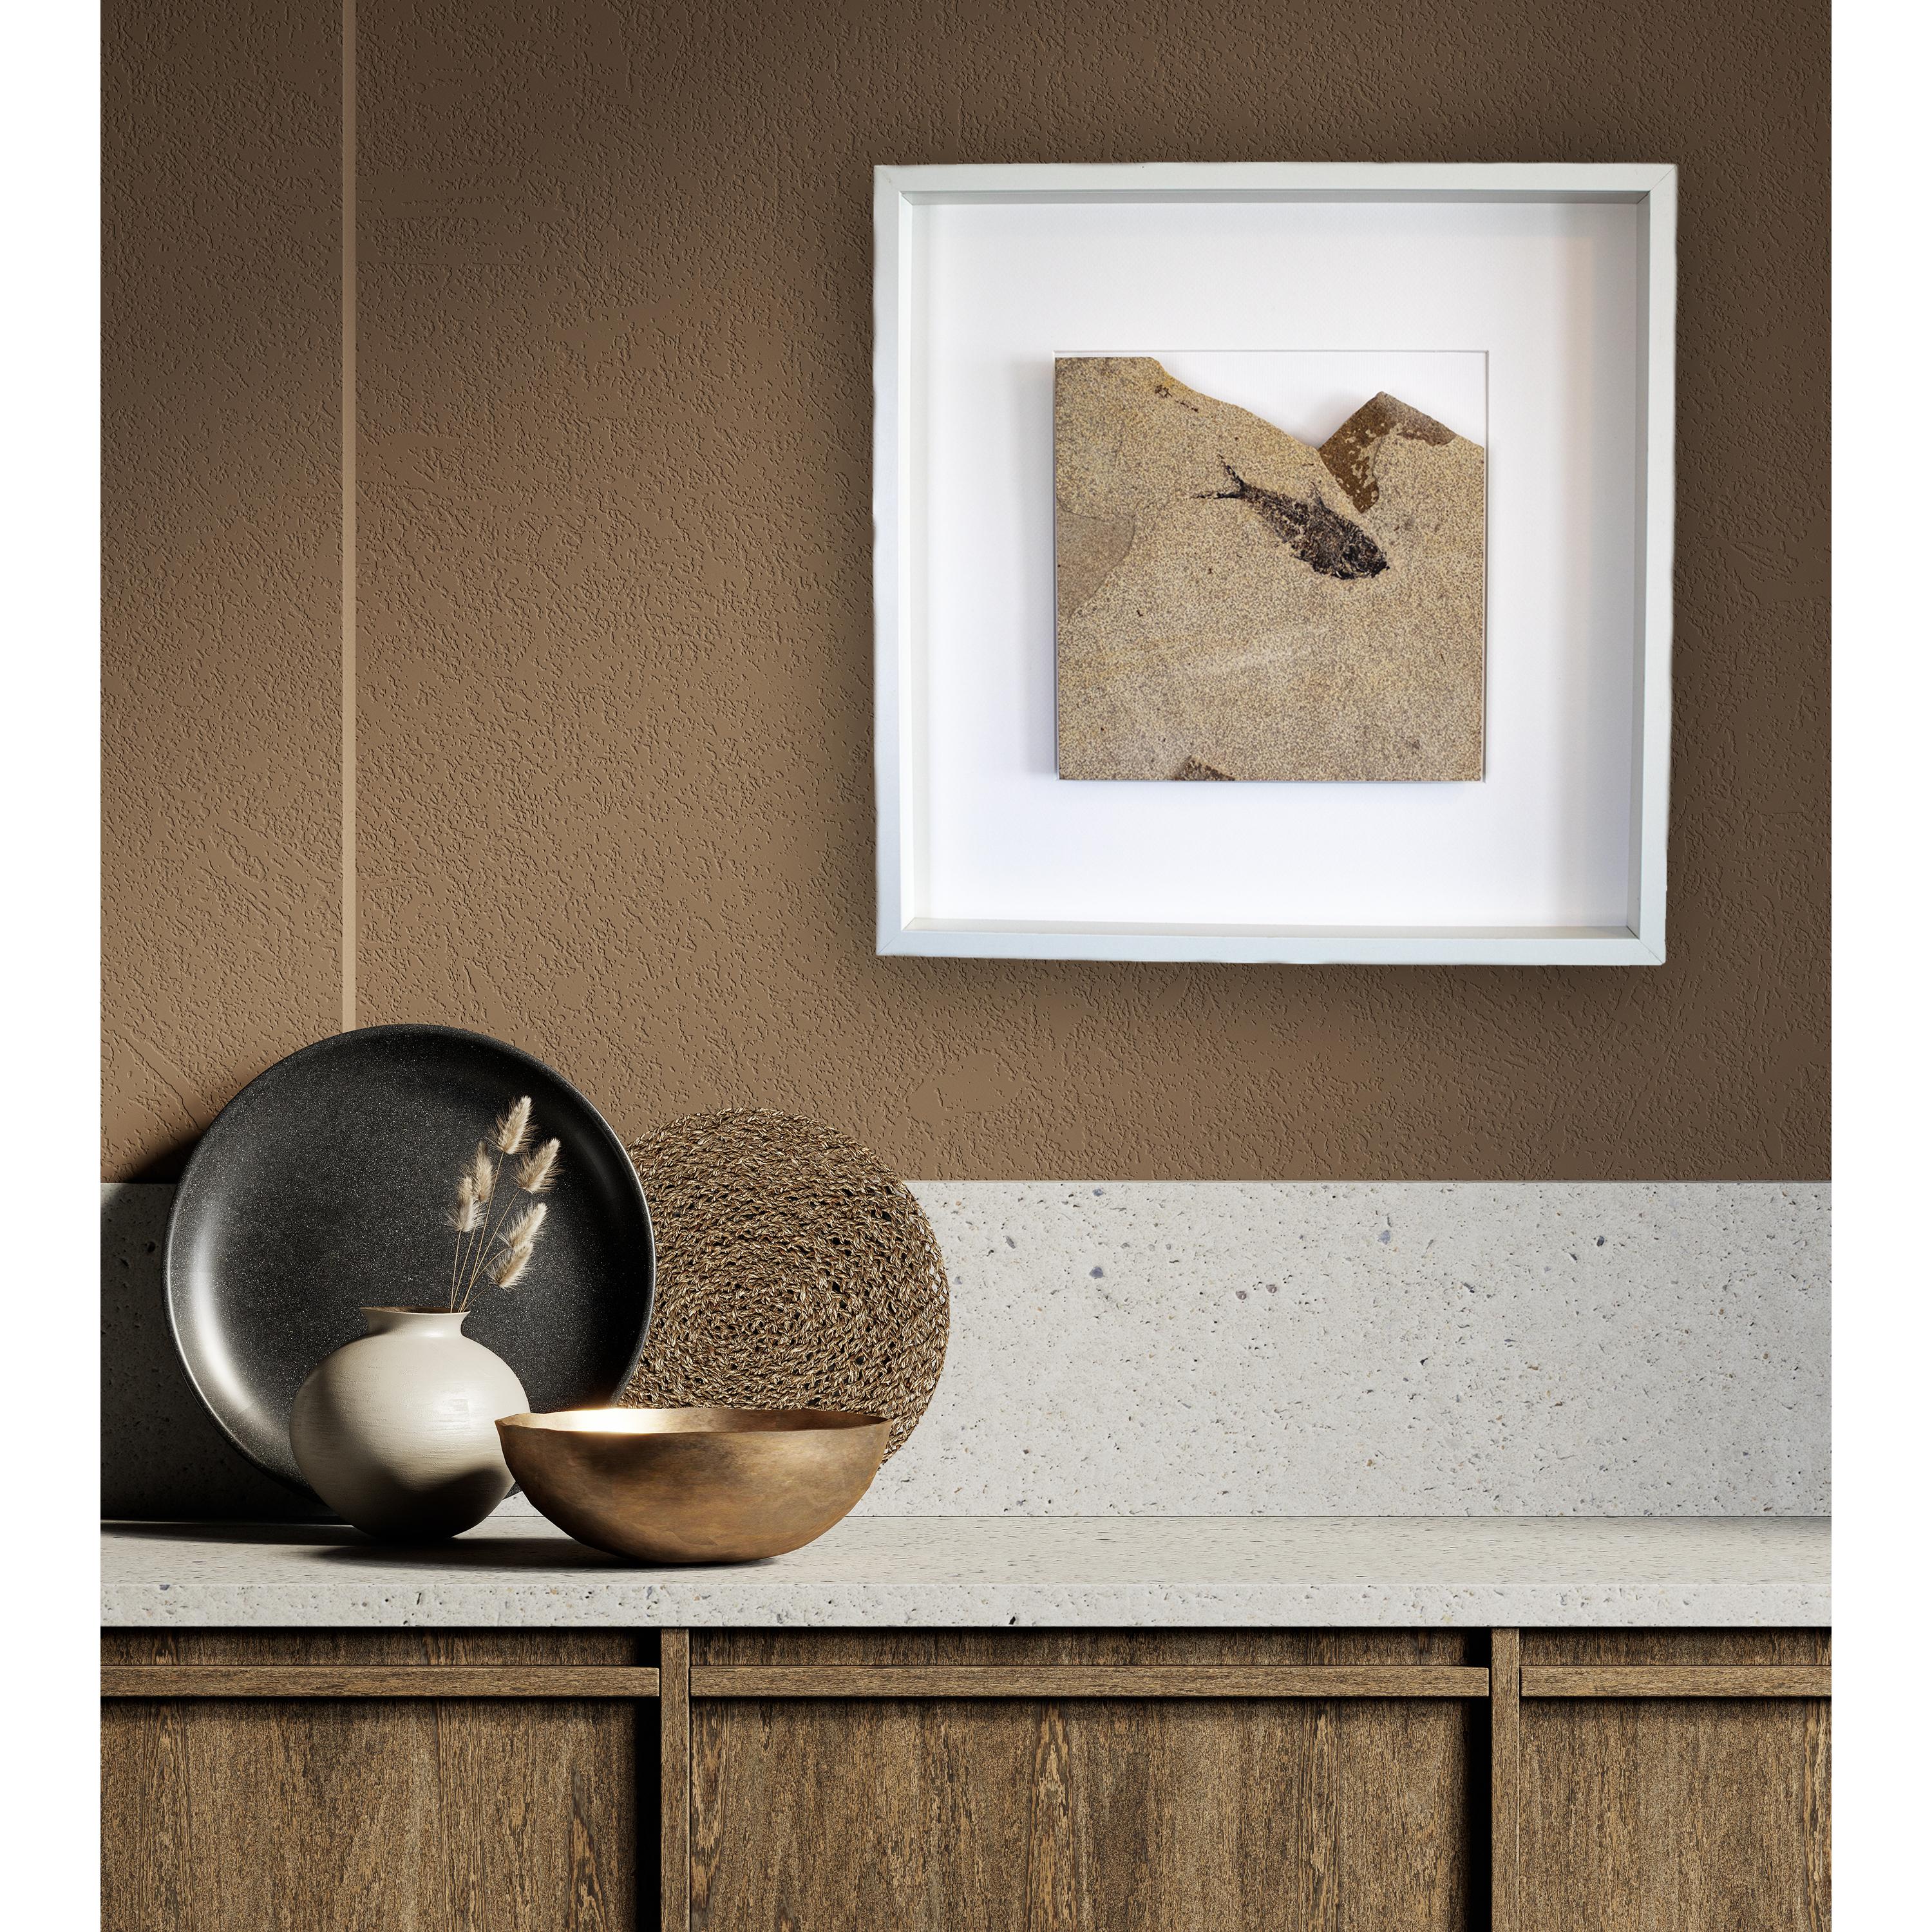 This distinctive shadow box features a single Diplomystus dentatus, a natural Eocene era fossil dating back circa 50 million years. This ancient fish is forever preserved in a beautifully textured matrix of natural, fossil-bearing limestone.

This